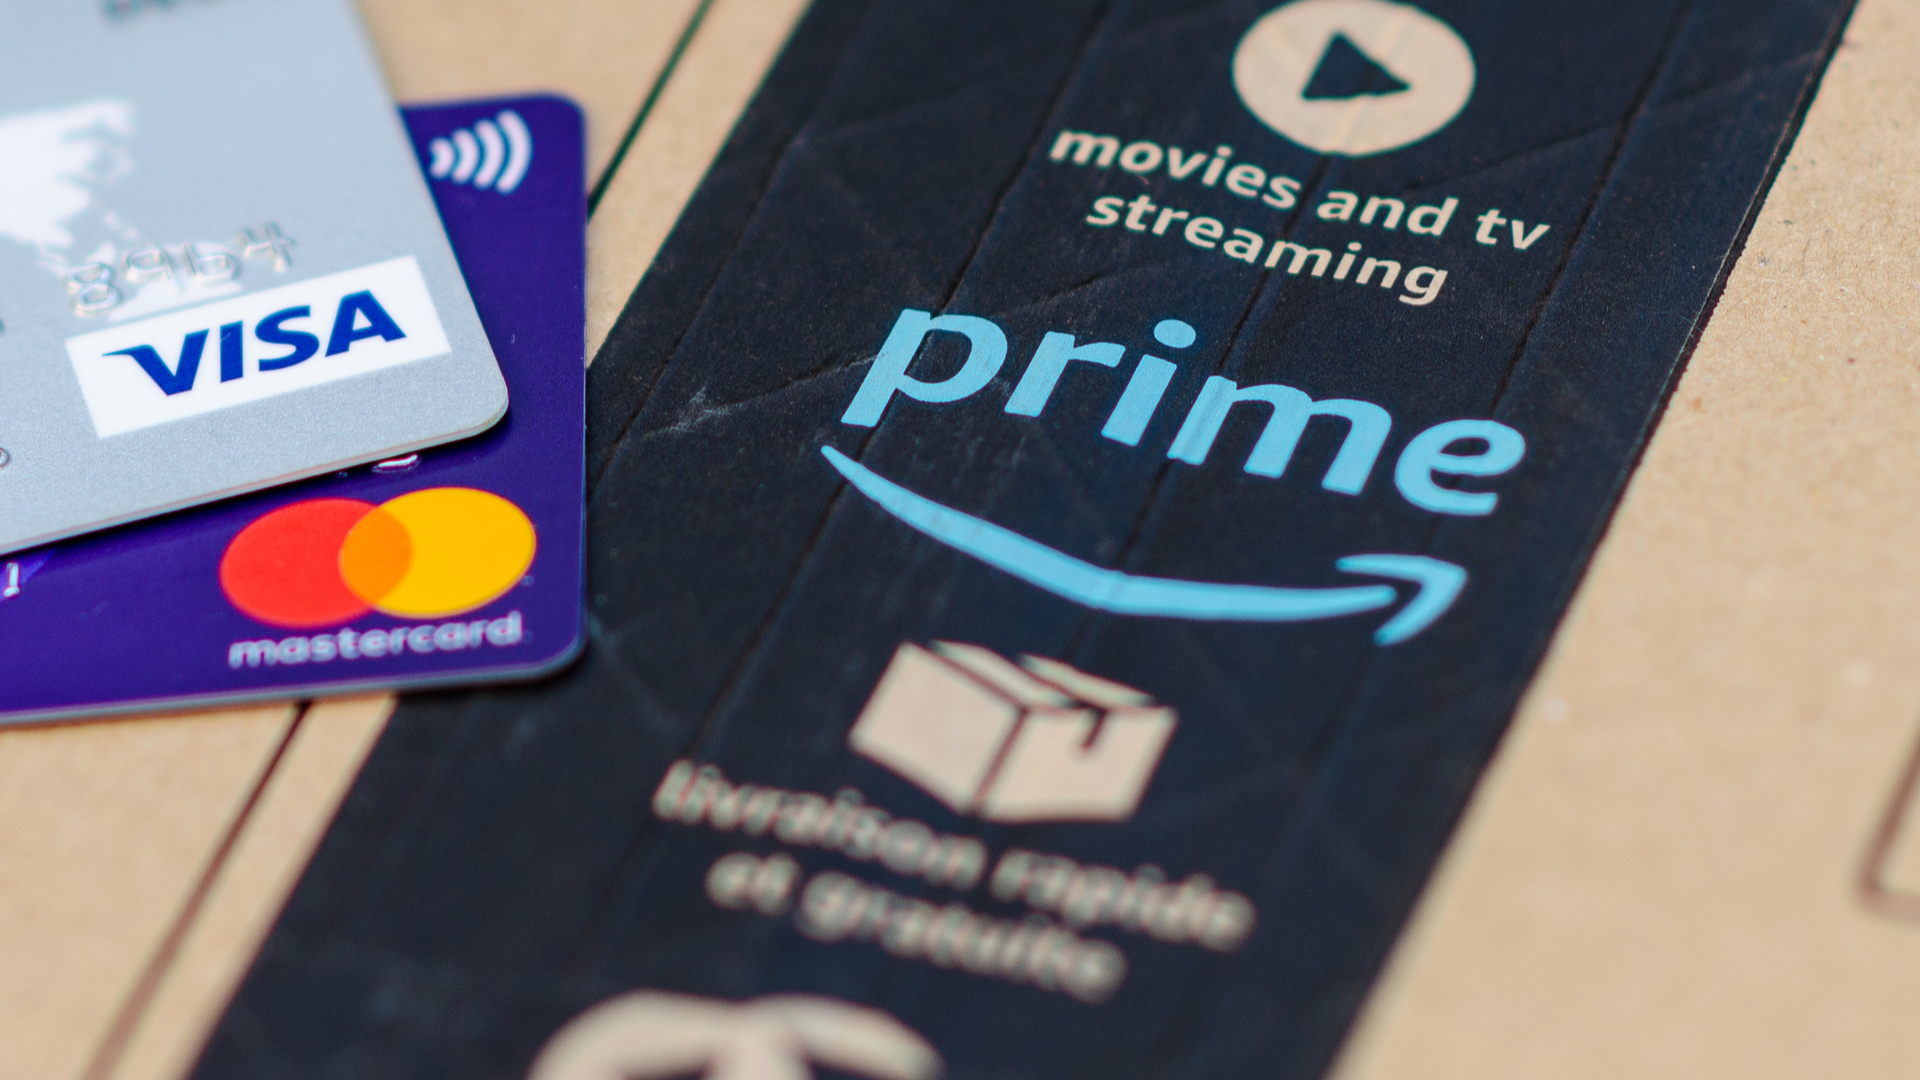 Amazon Prime package with two credit cards on top